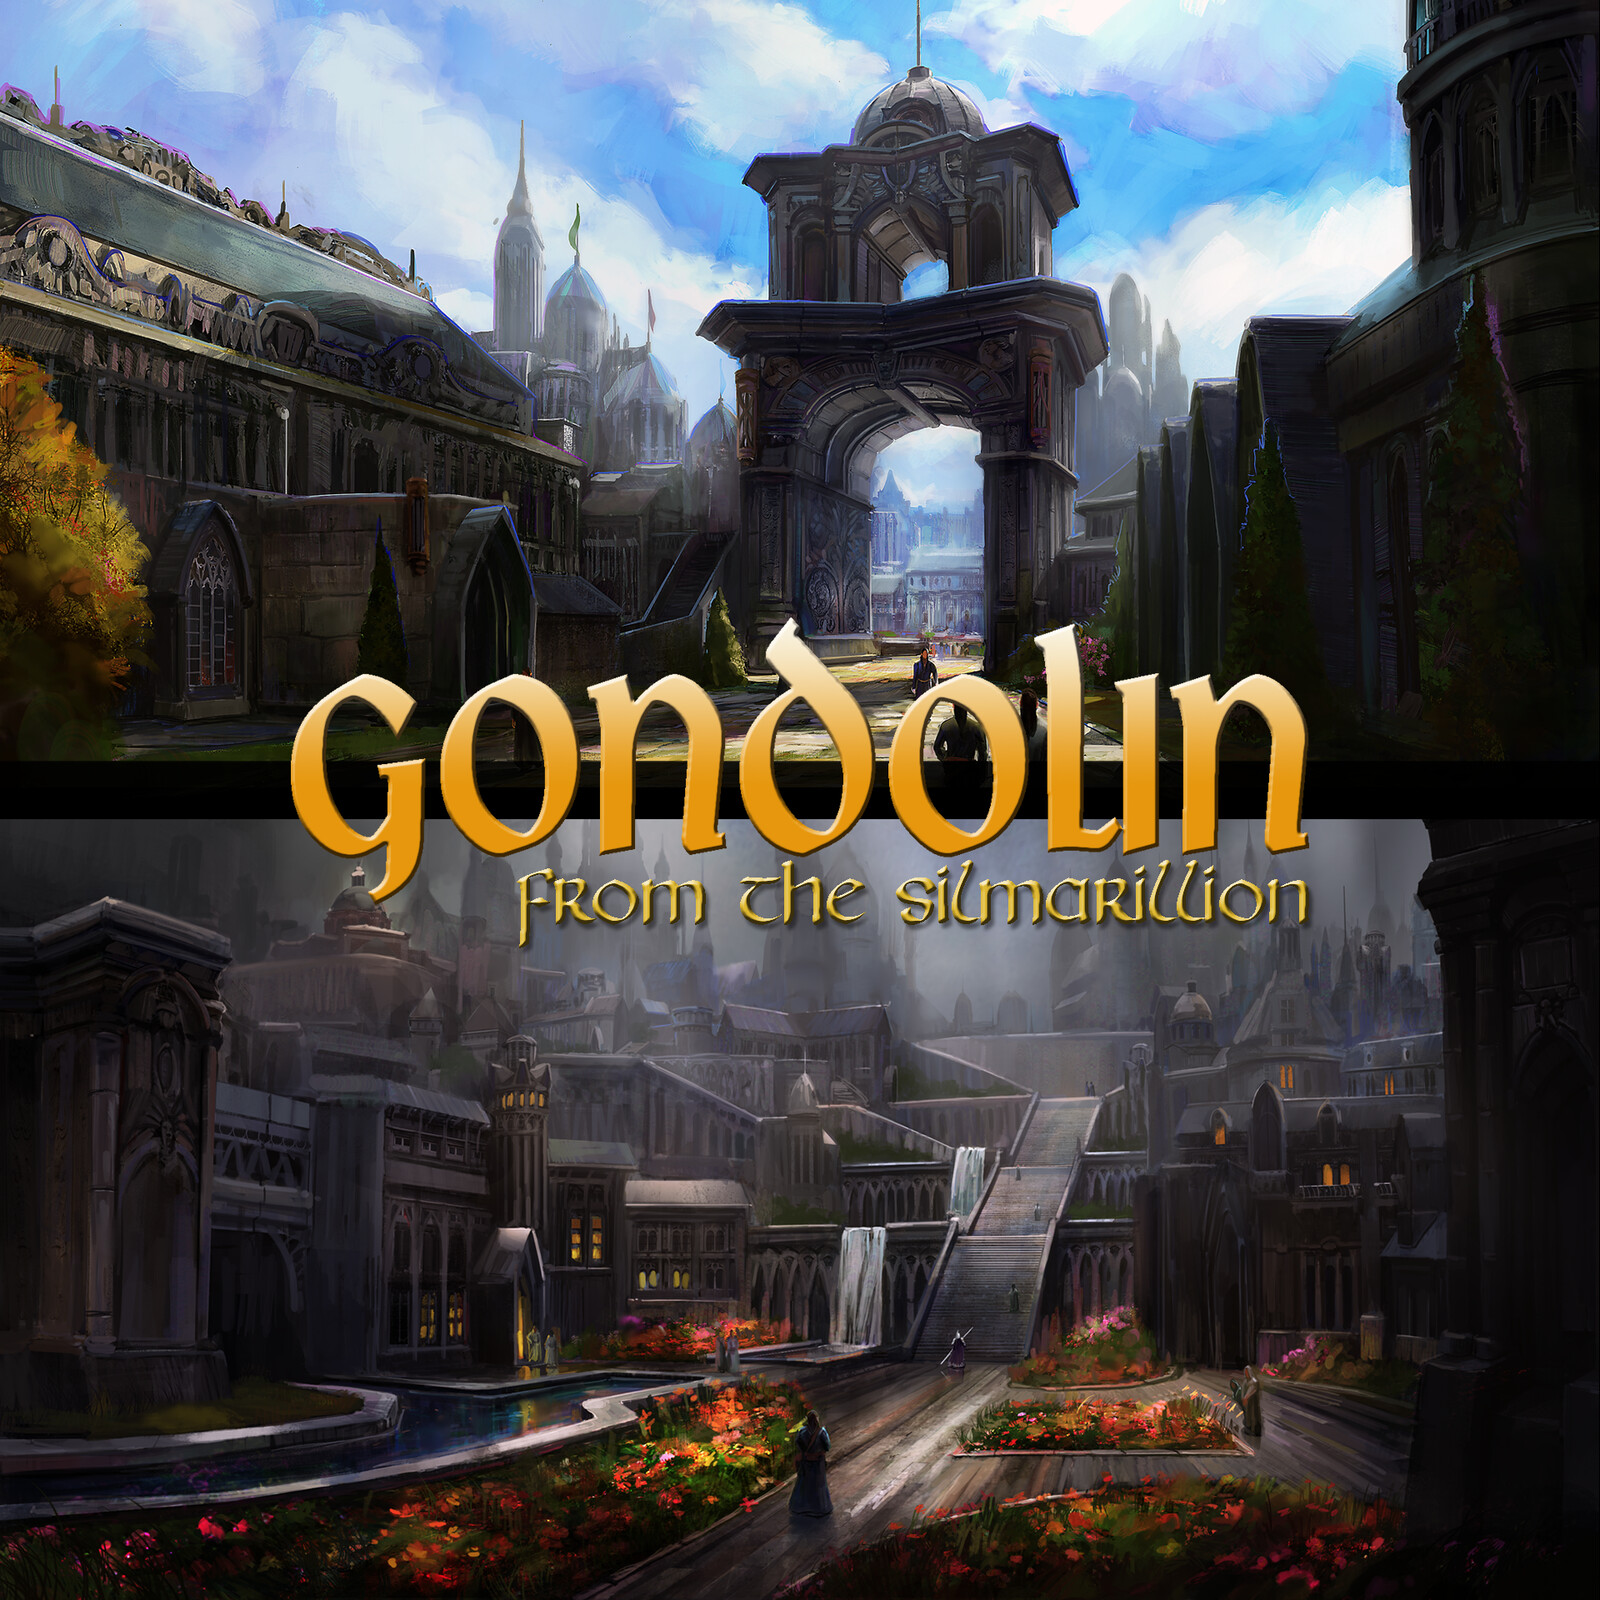 Gondolin Arc of Ingwe, Arc Road, Road of Roses - From the silmarillion